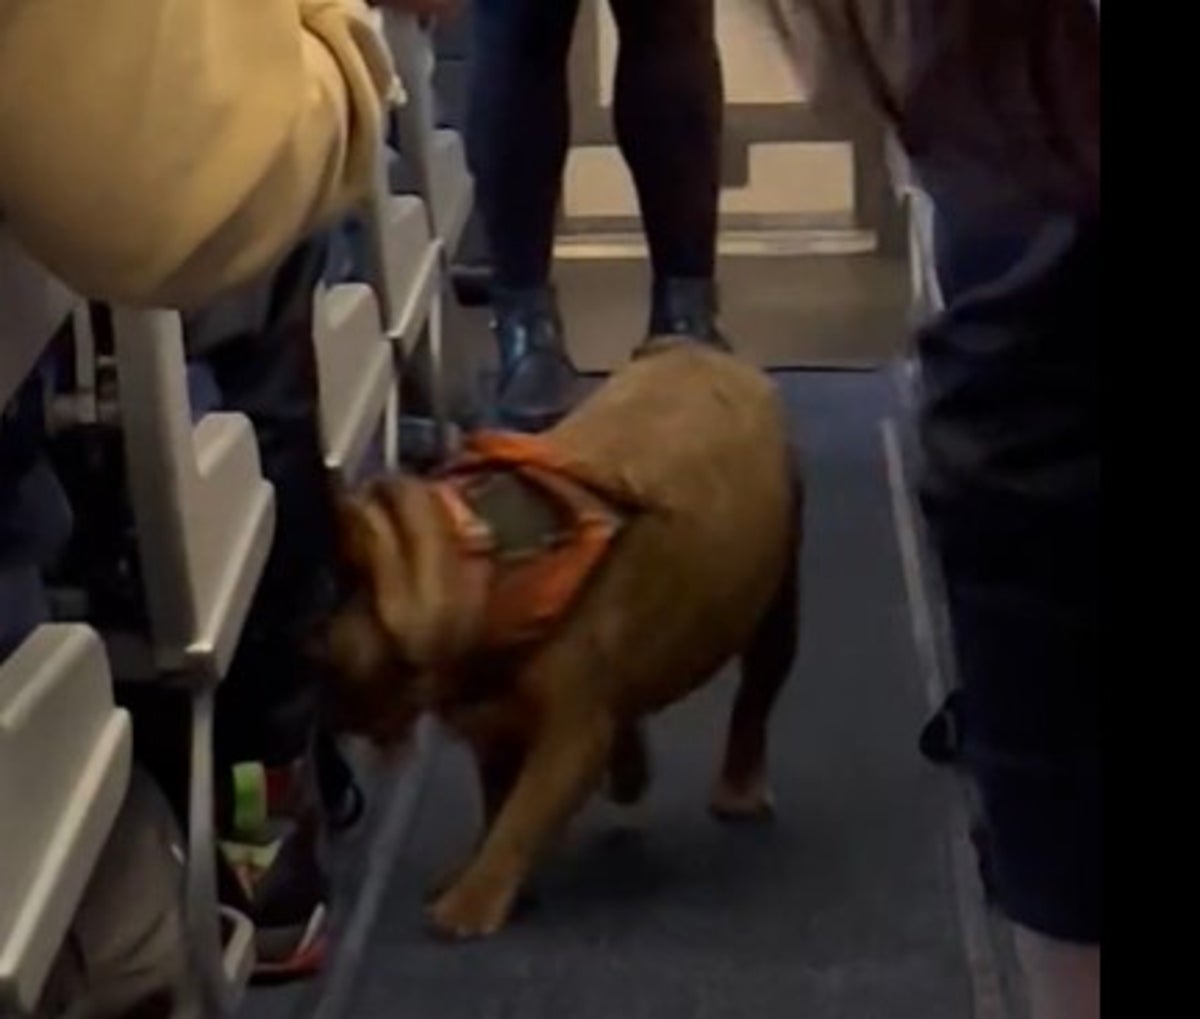 French bulldog escapes travel crate and frolics around plane cabin after owner falls asleep